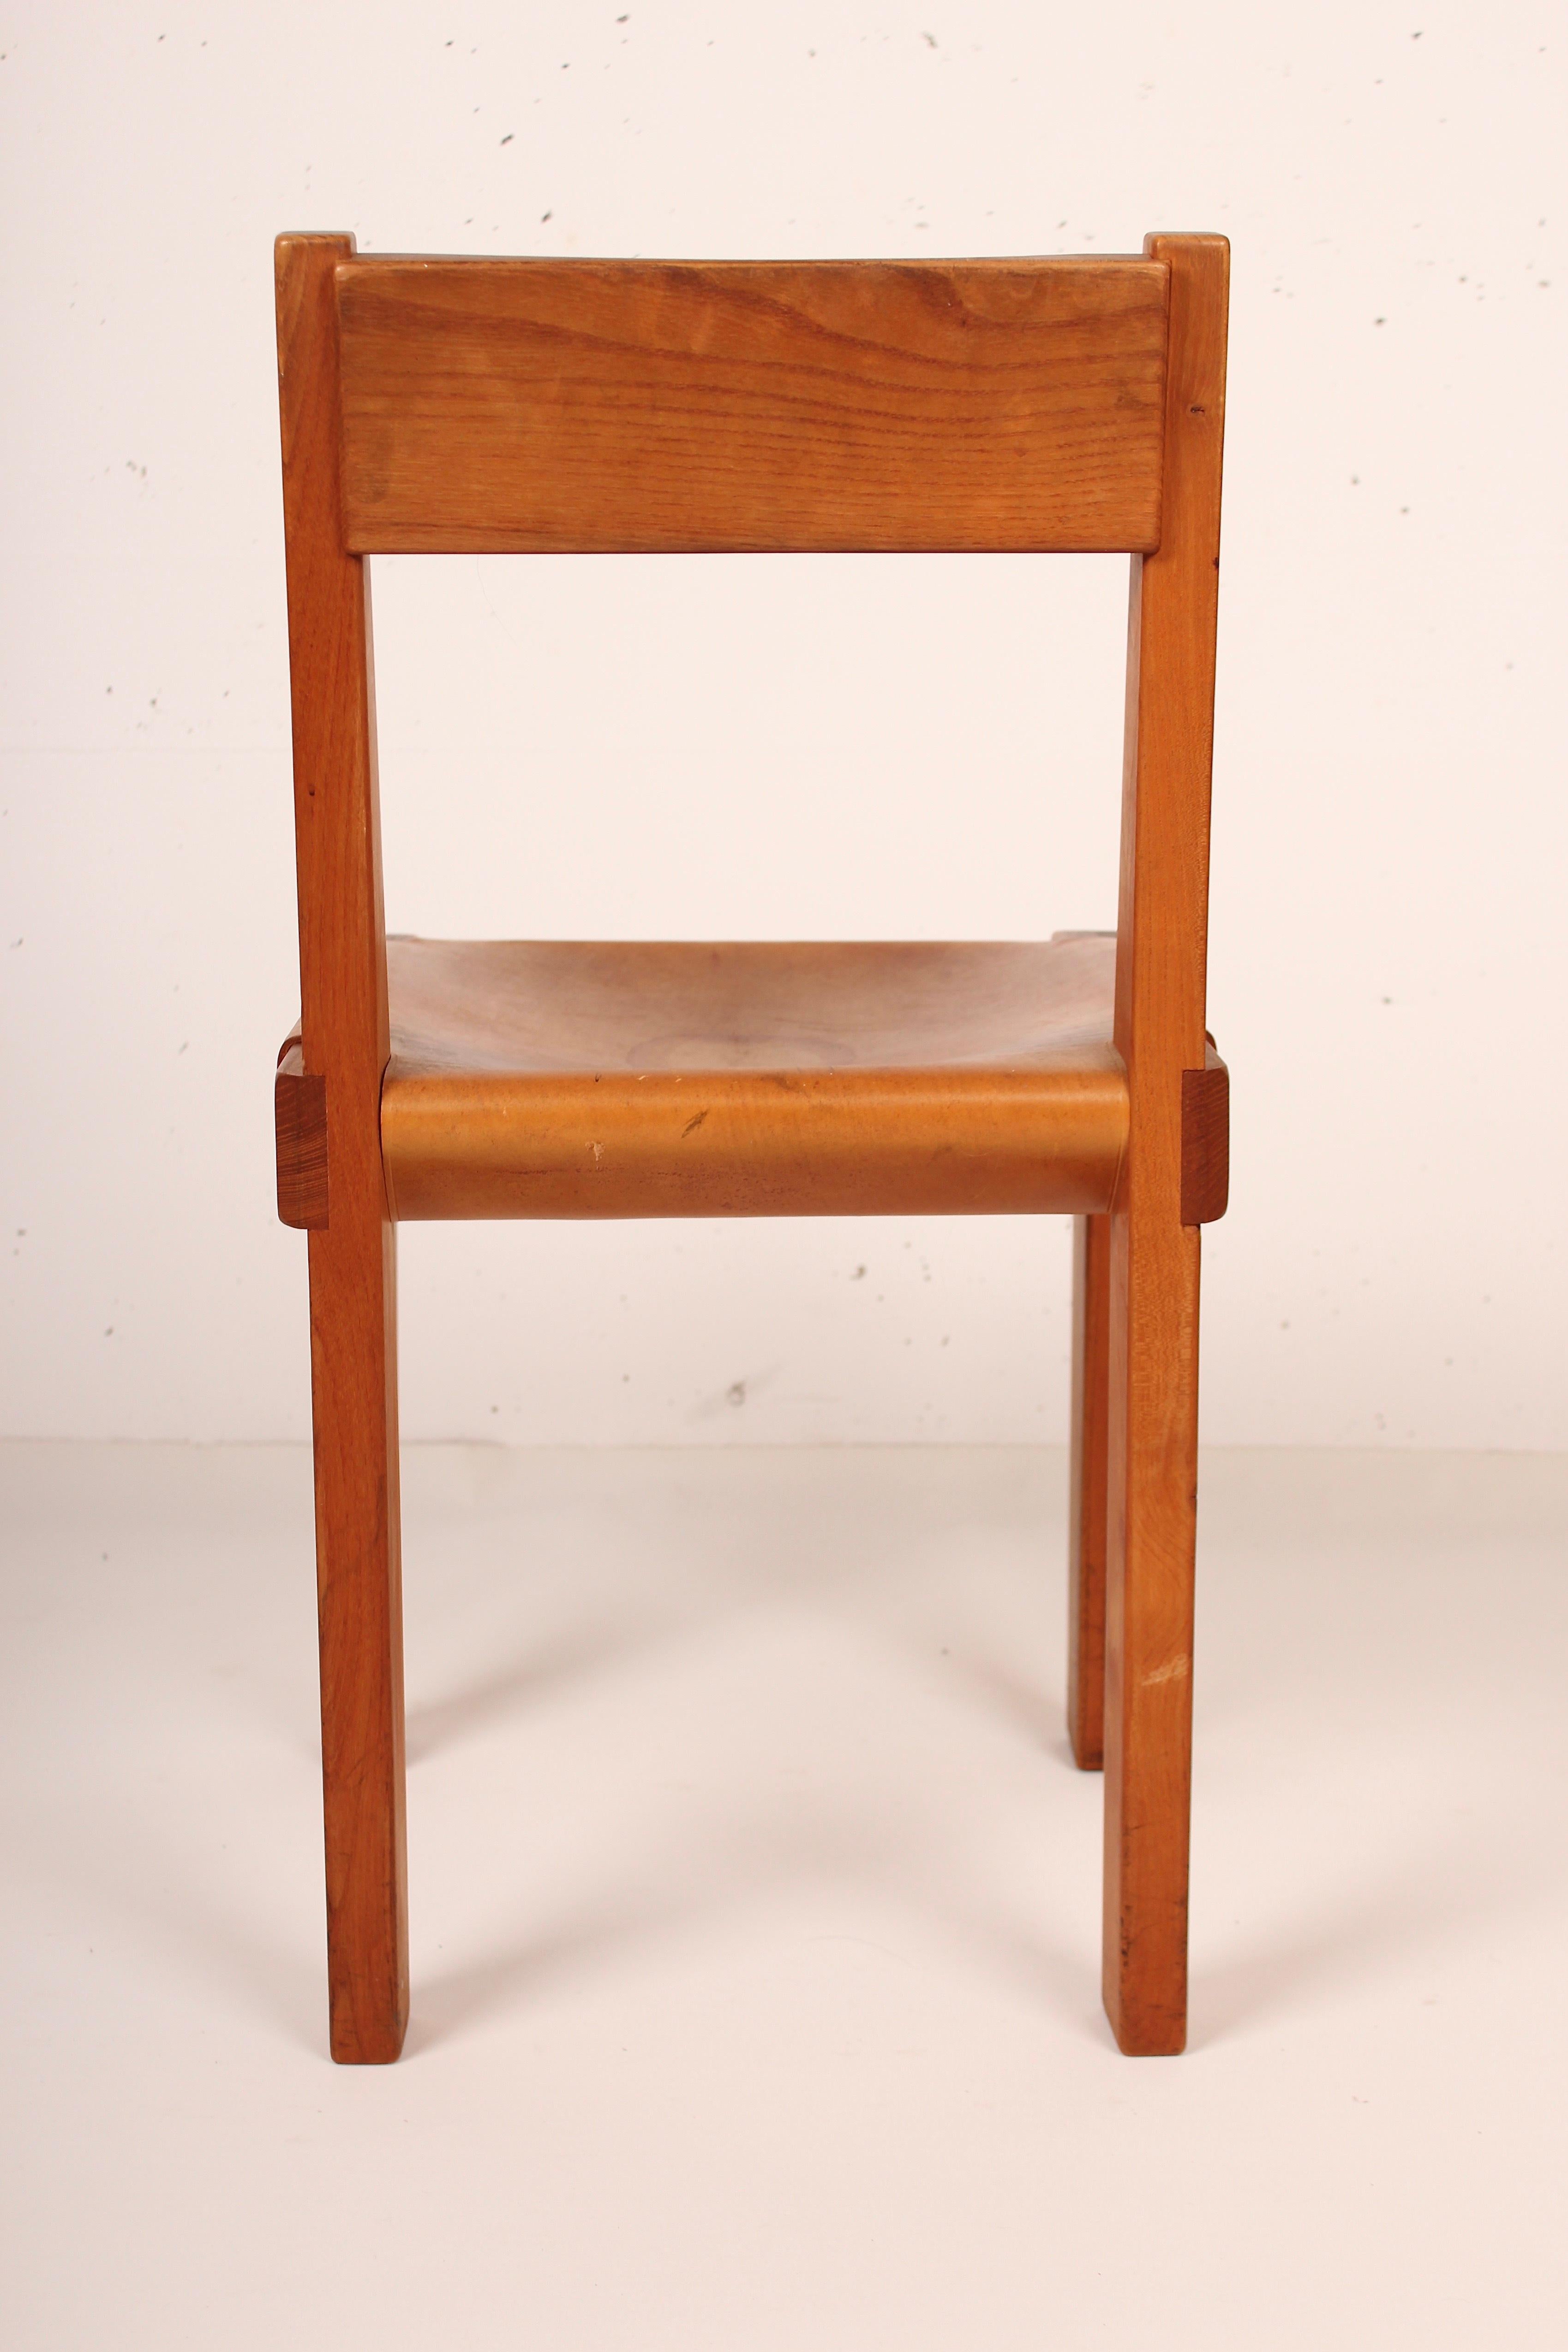 Pierre Chapo Set of Four Elm and Leather S 24 Dining Chairs, France, 1960s For Sale 4